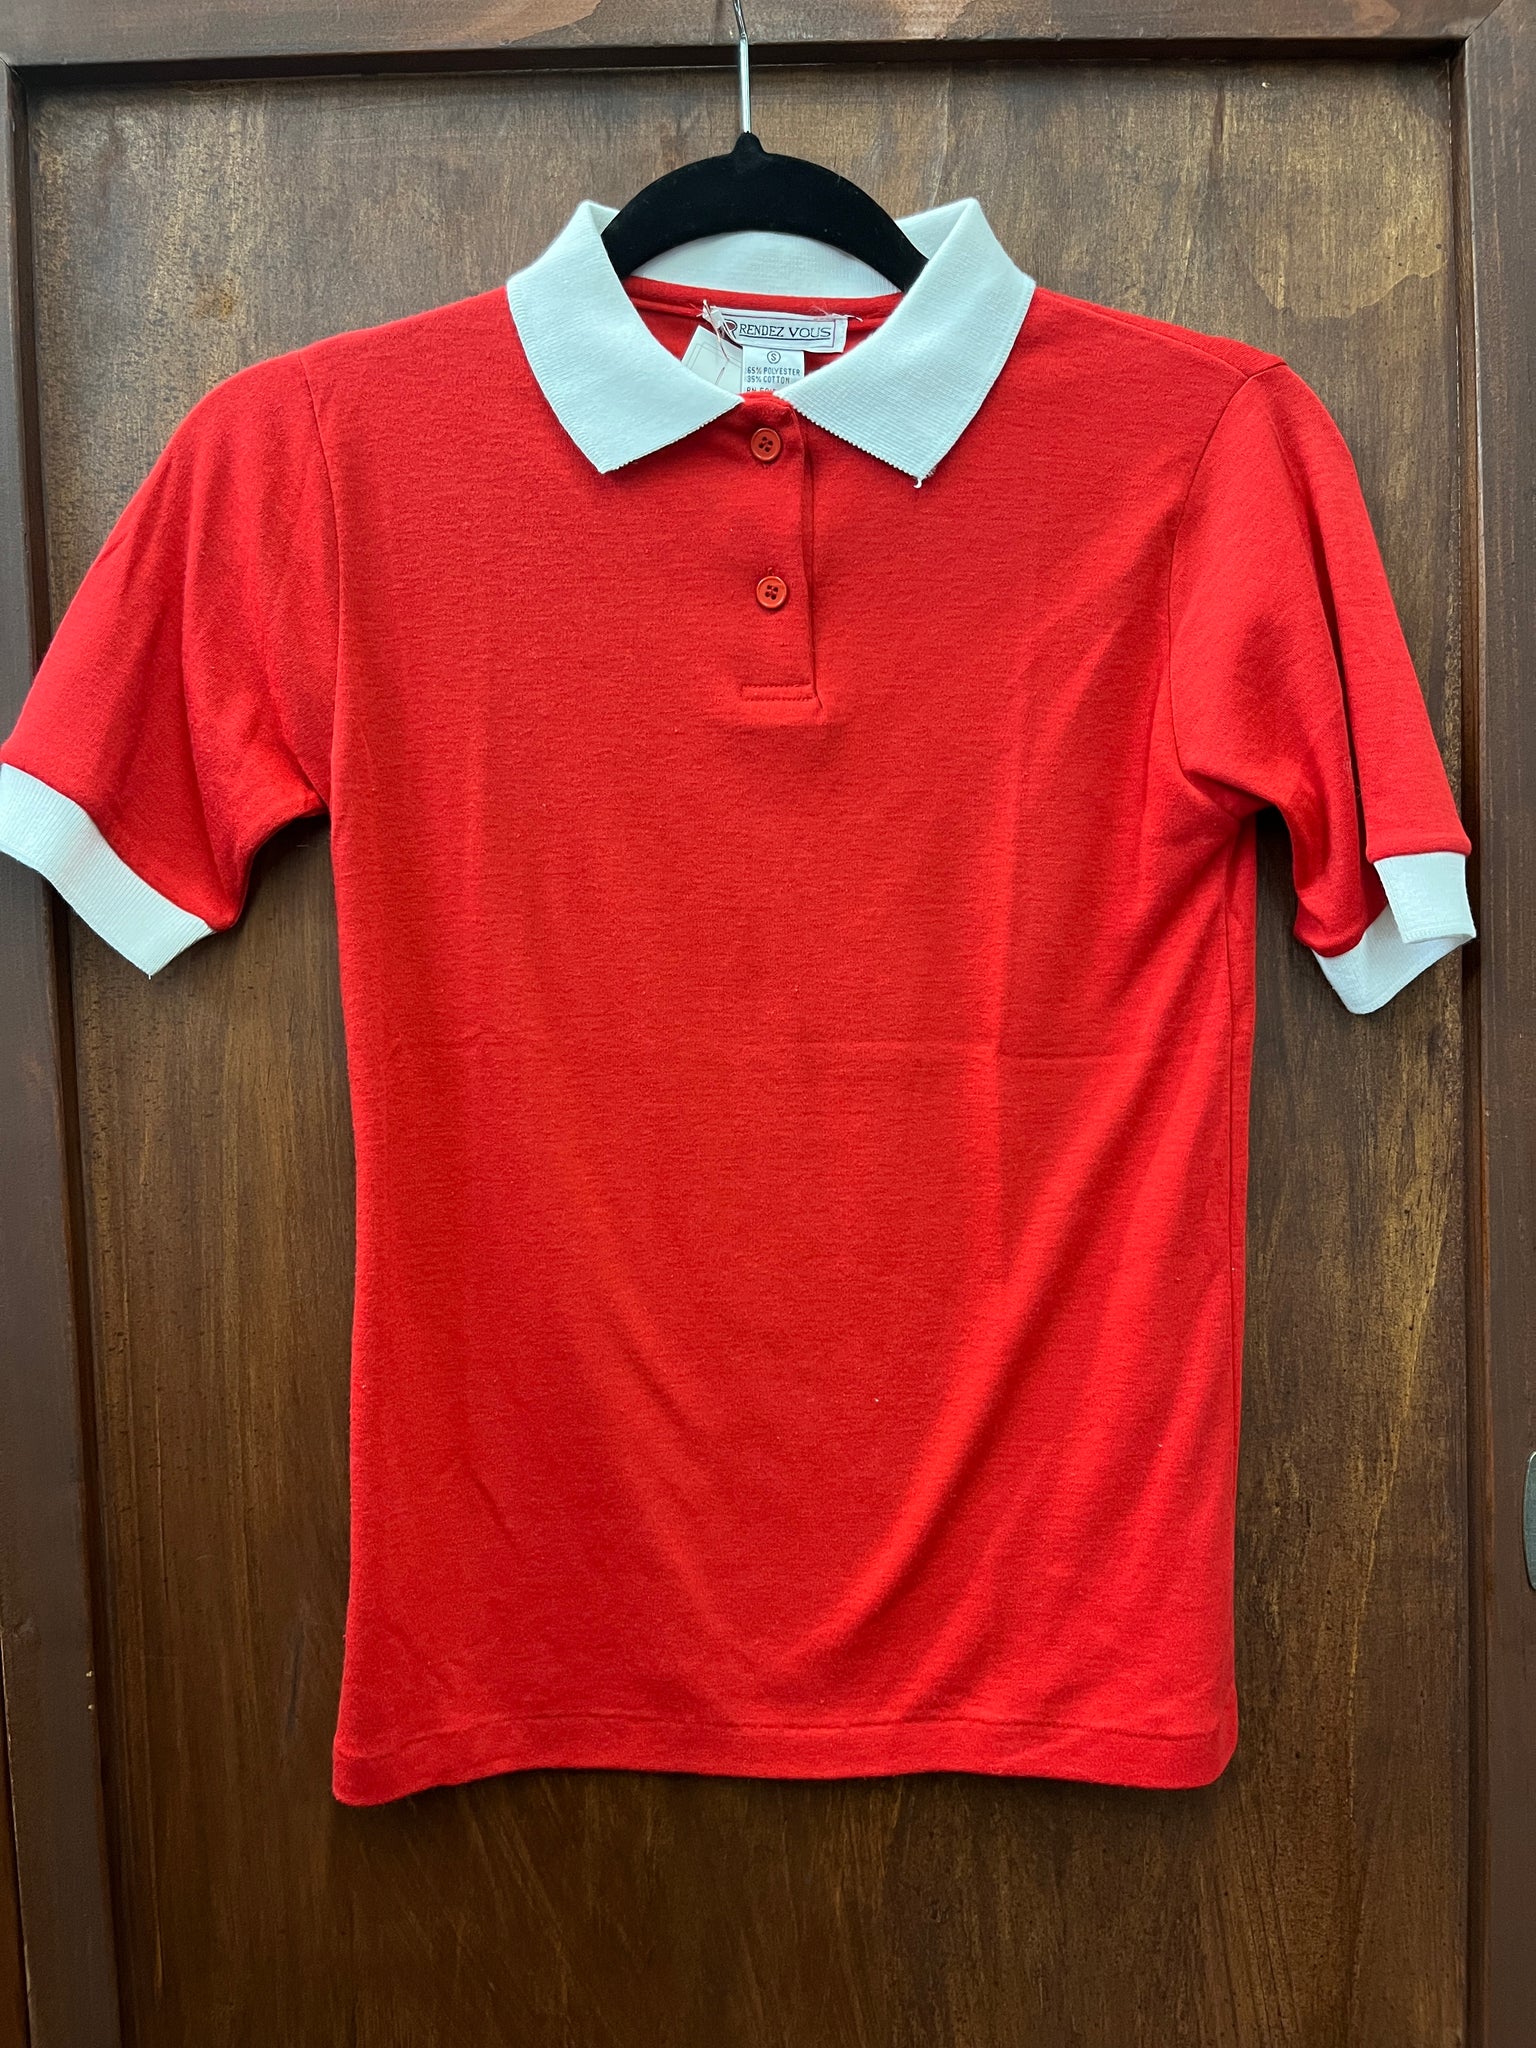 1980s TSHIRT- Polo-Rendez Vous- cherry red white collar